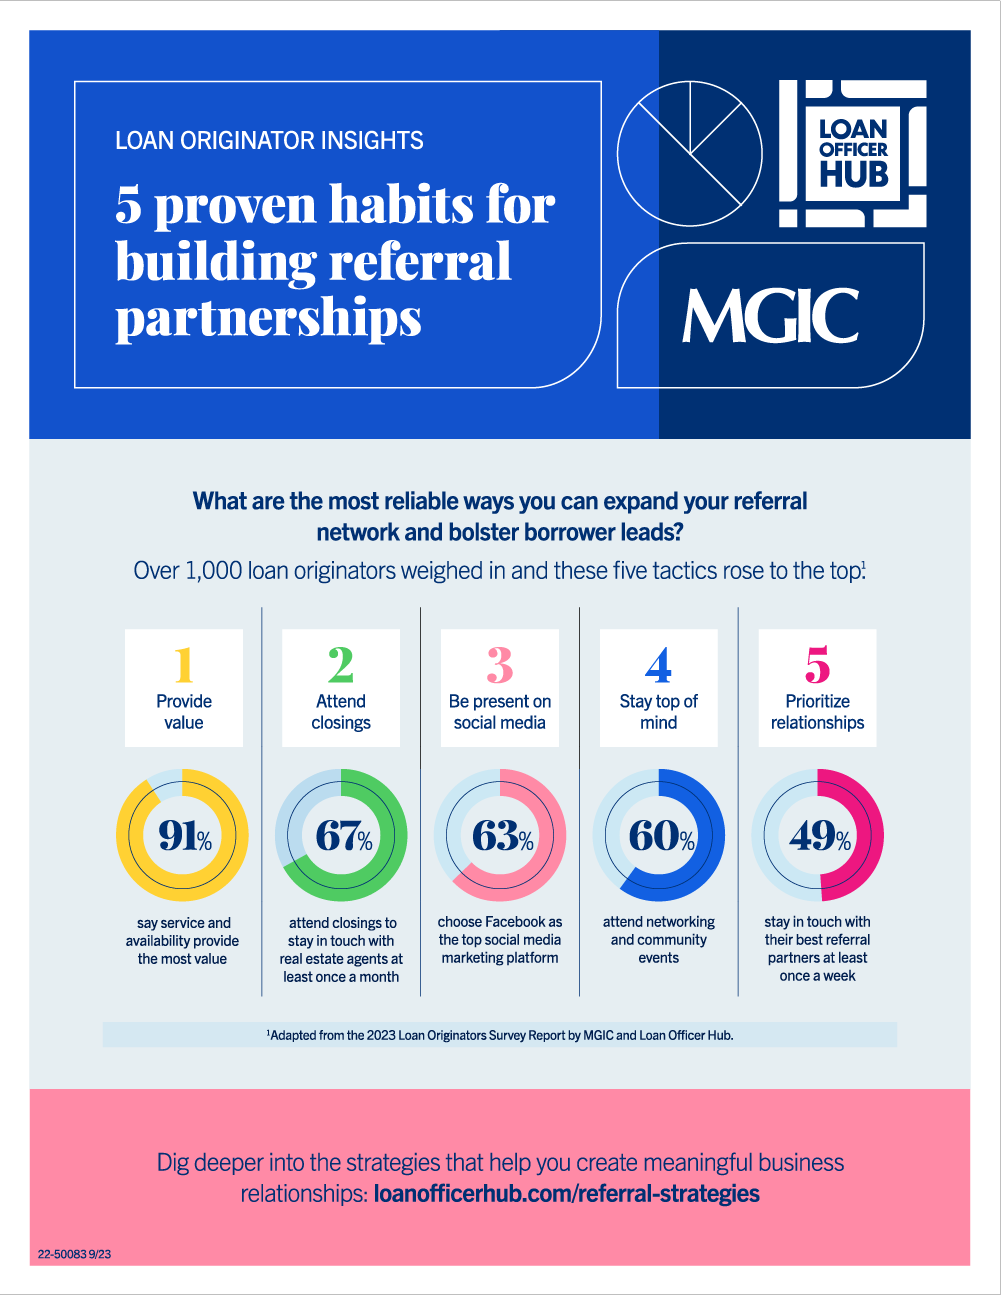 Infographic showing the top 5 tactics loan officers use to attract and build relationships with referral partners.